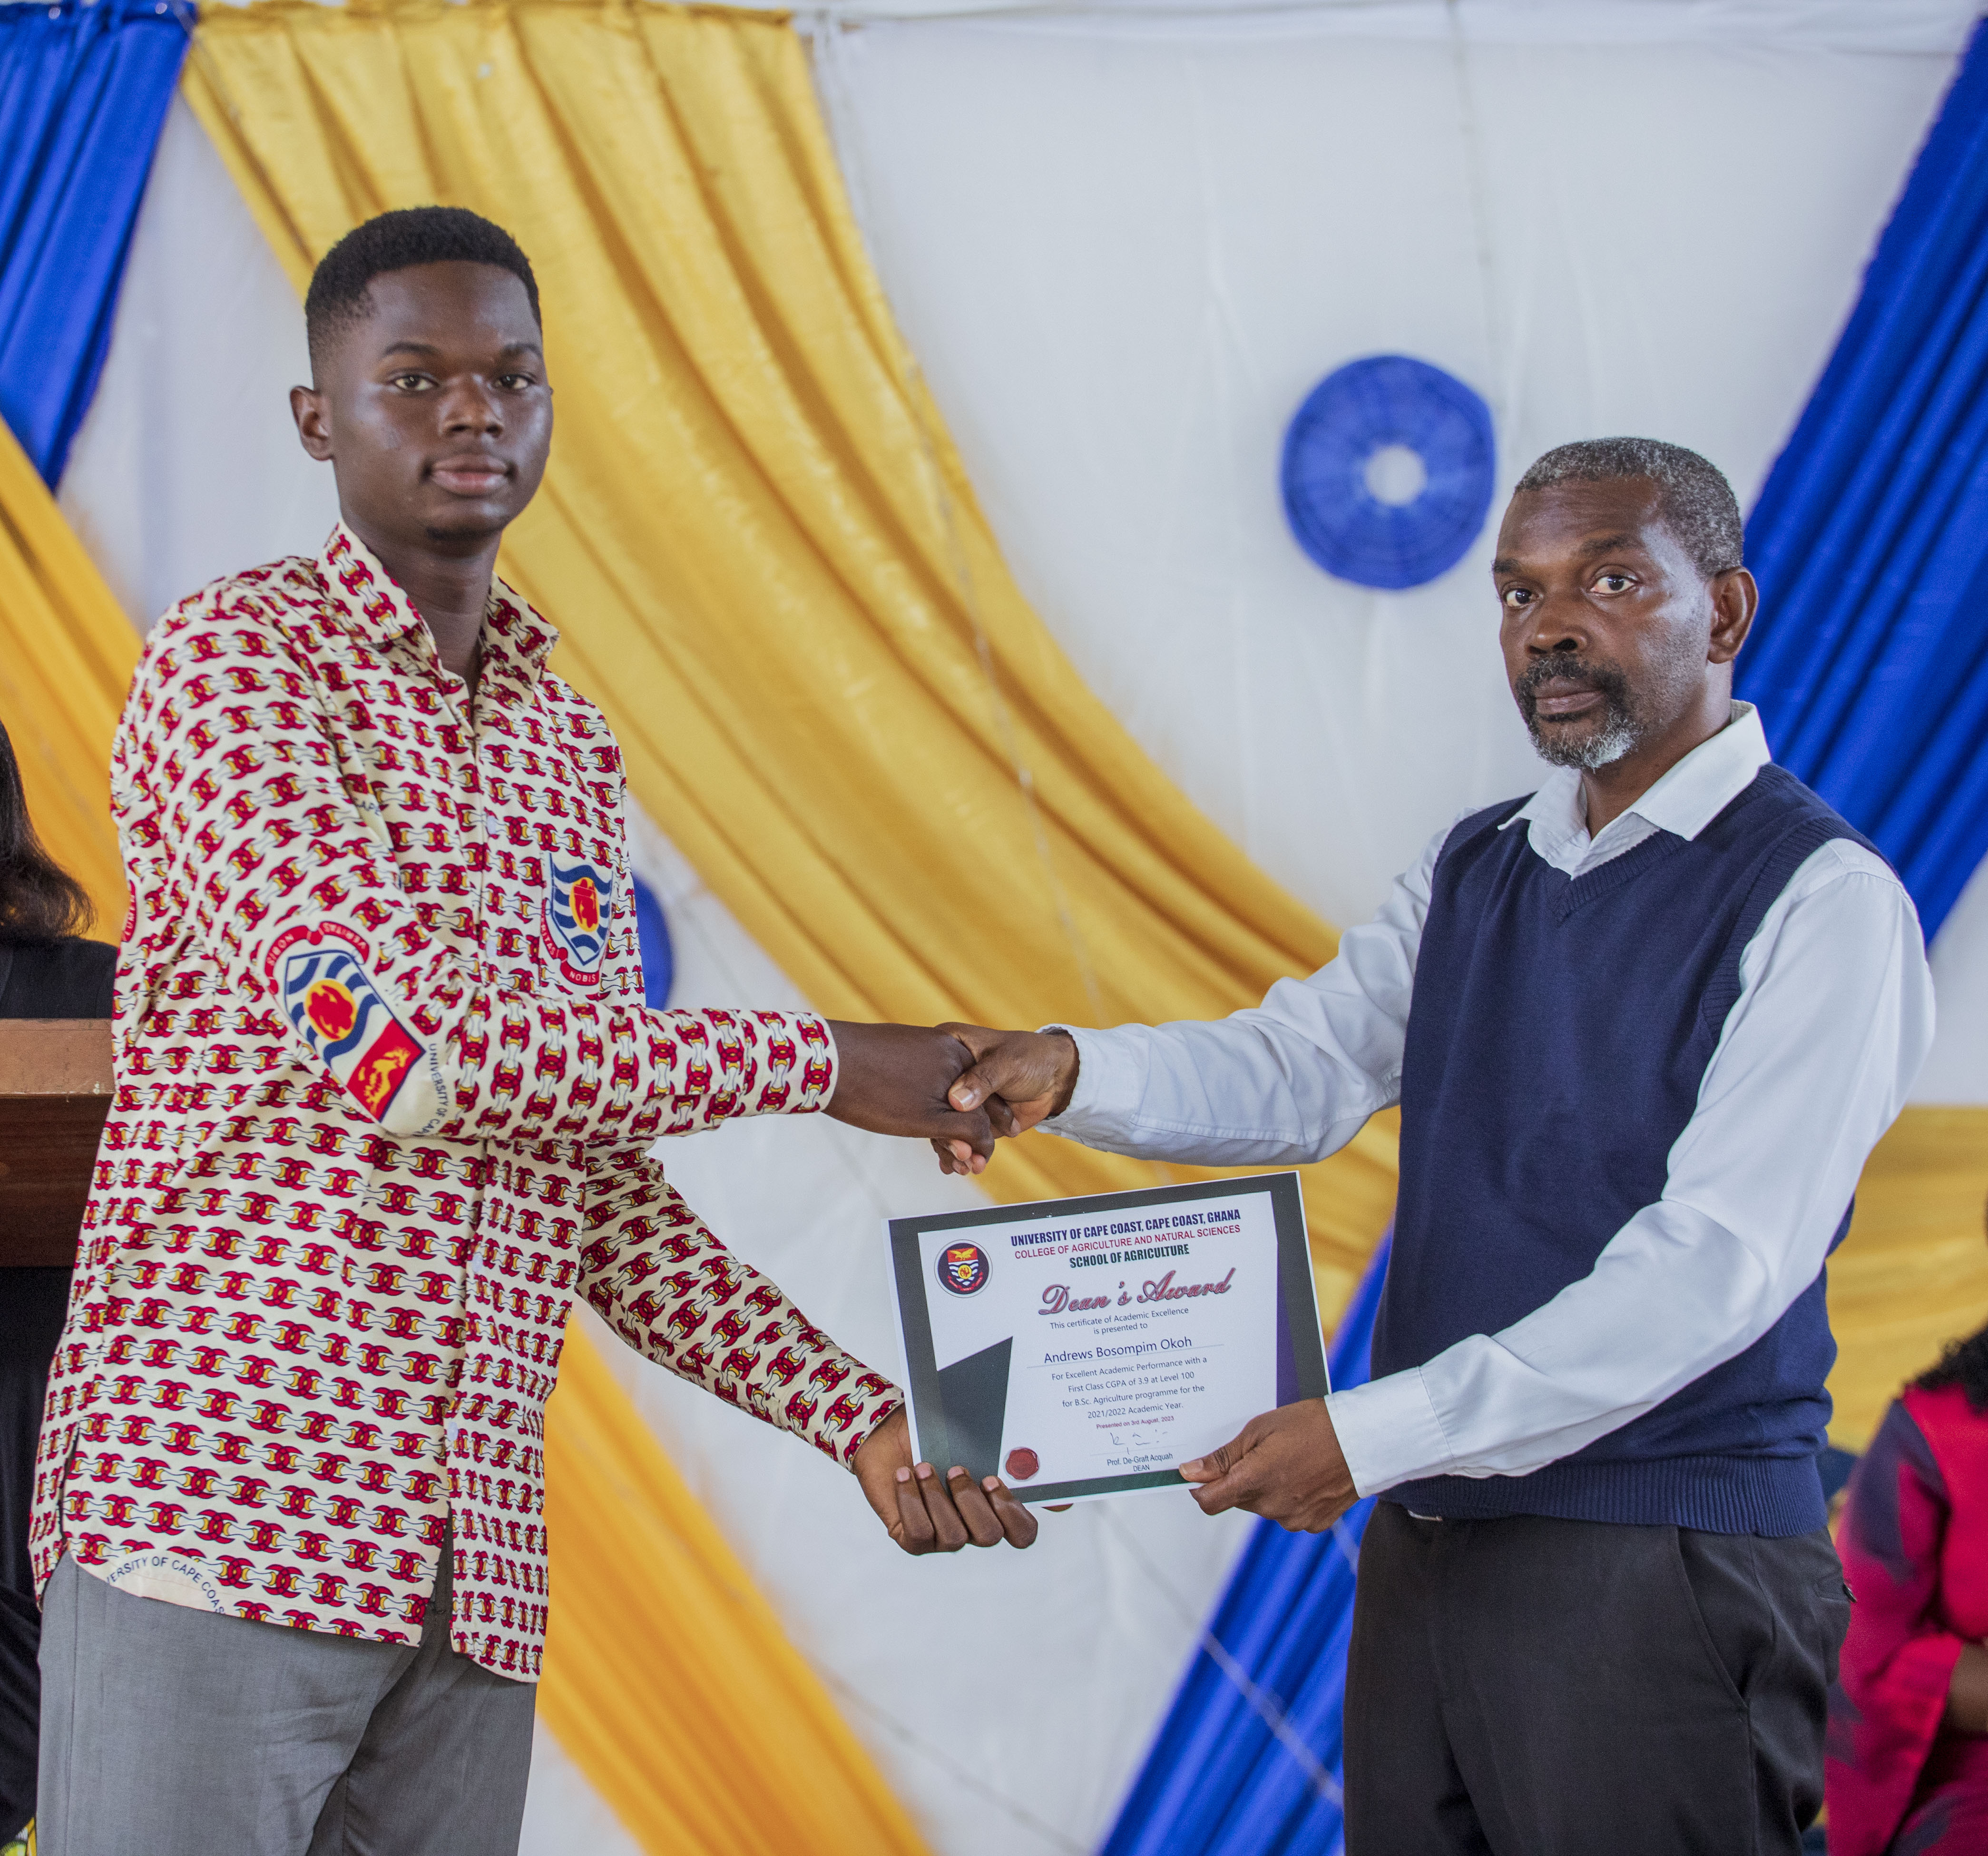  School of Agriculture  Dean's Award